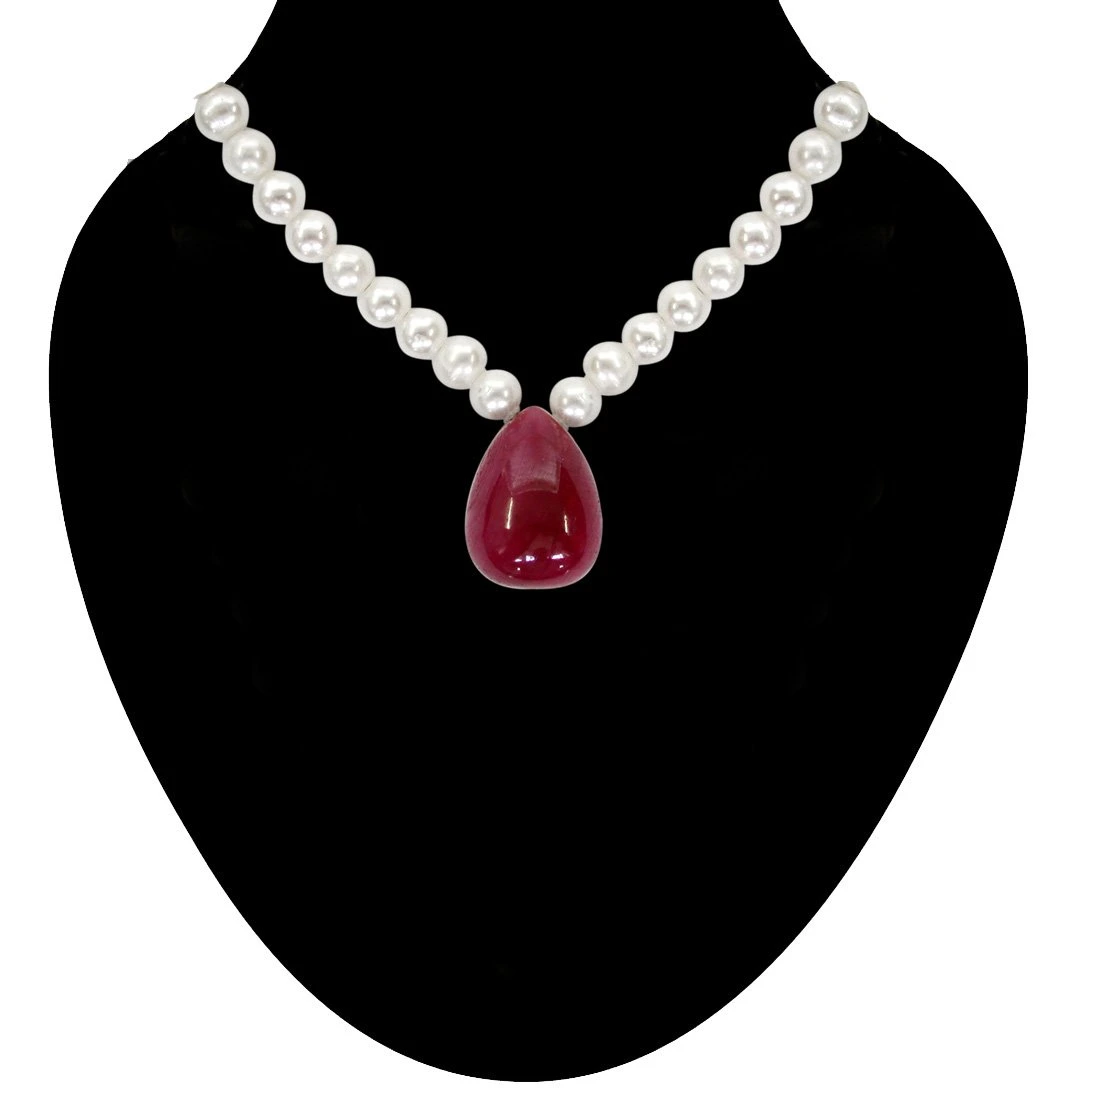 10.50 cts Real Drop Ruby and Freshwater Pearl Necklace for Women (SN129-10.5cts)